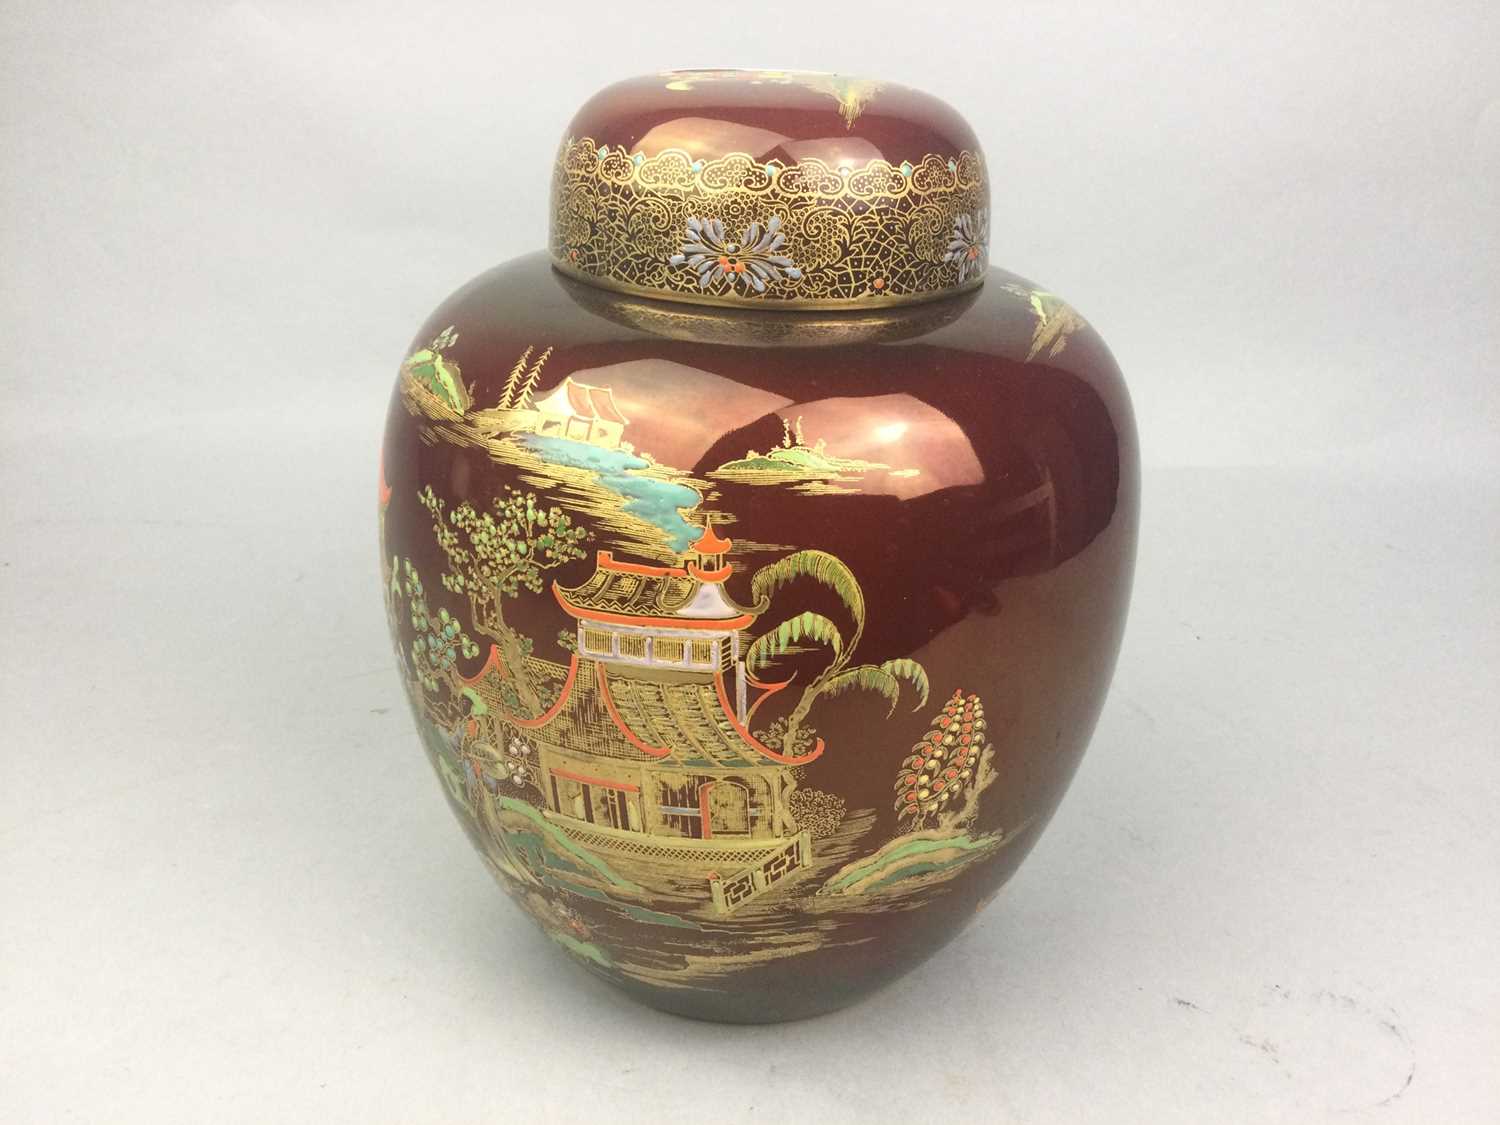 Lot 61 - A CARLTON WARE GINGER JAR AND COVER, ALONG WITH OTHER CERAMICS INCLUDING A PART COFFEE SET